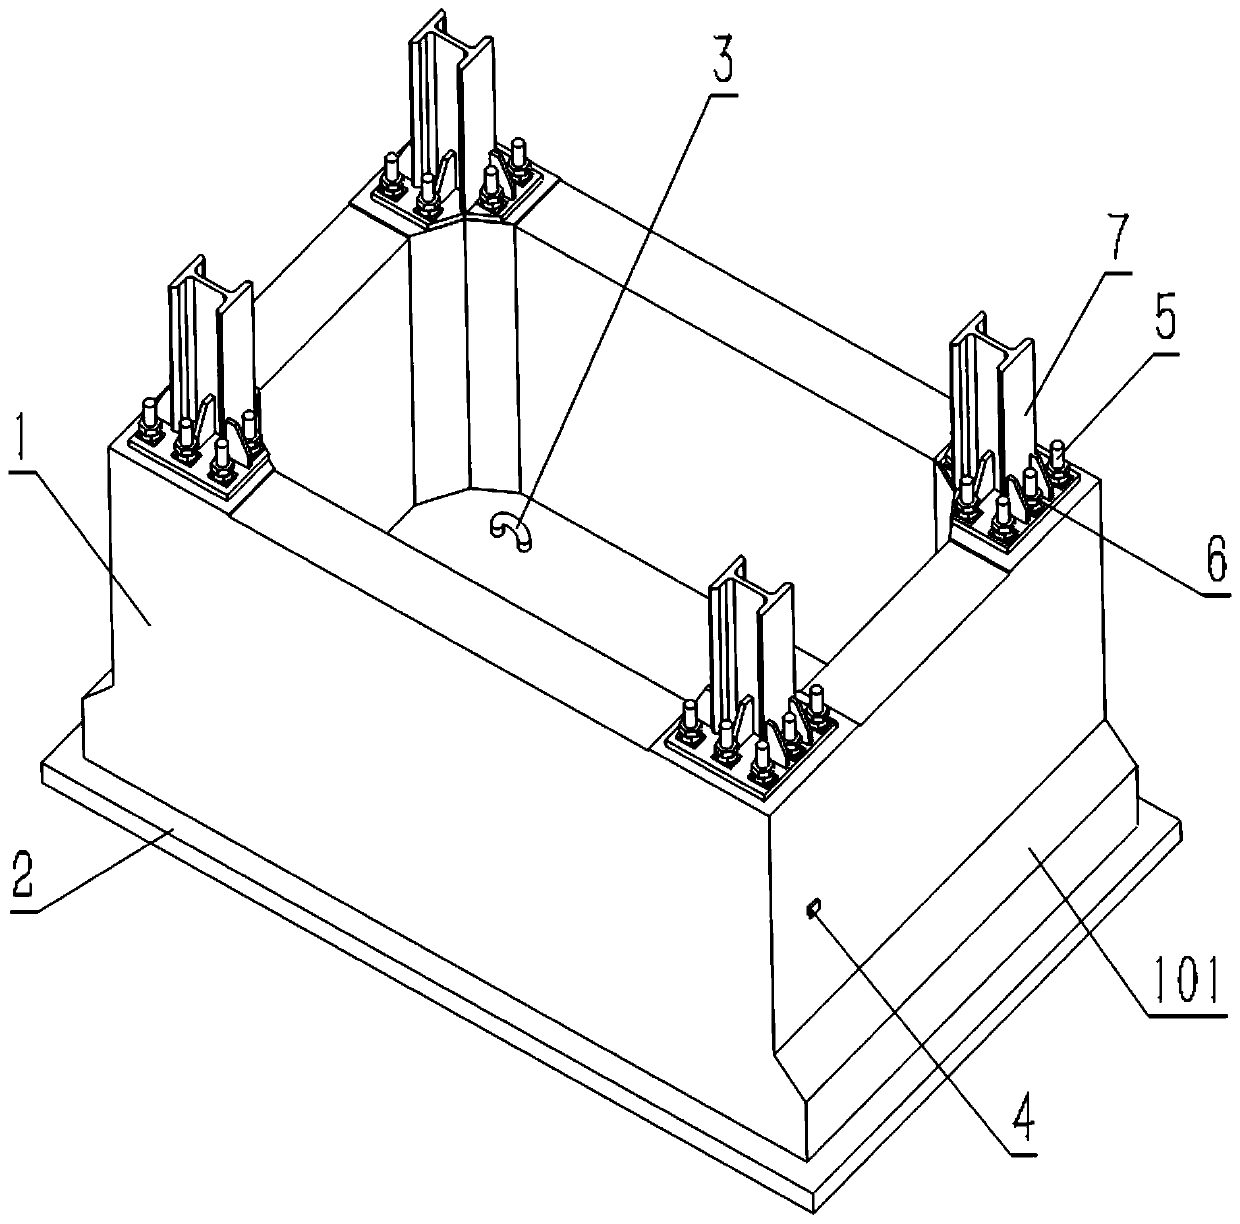 Prefabricated foundation pit for additionally installing elevator and construction method